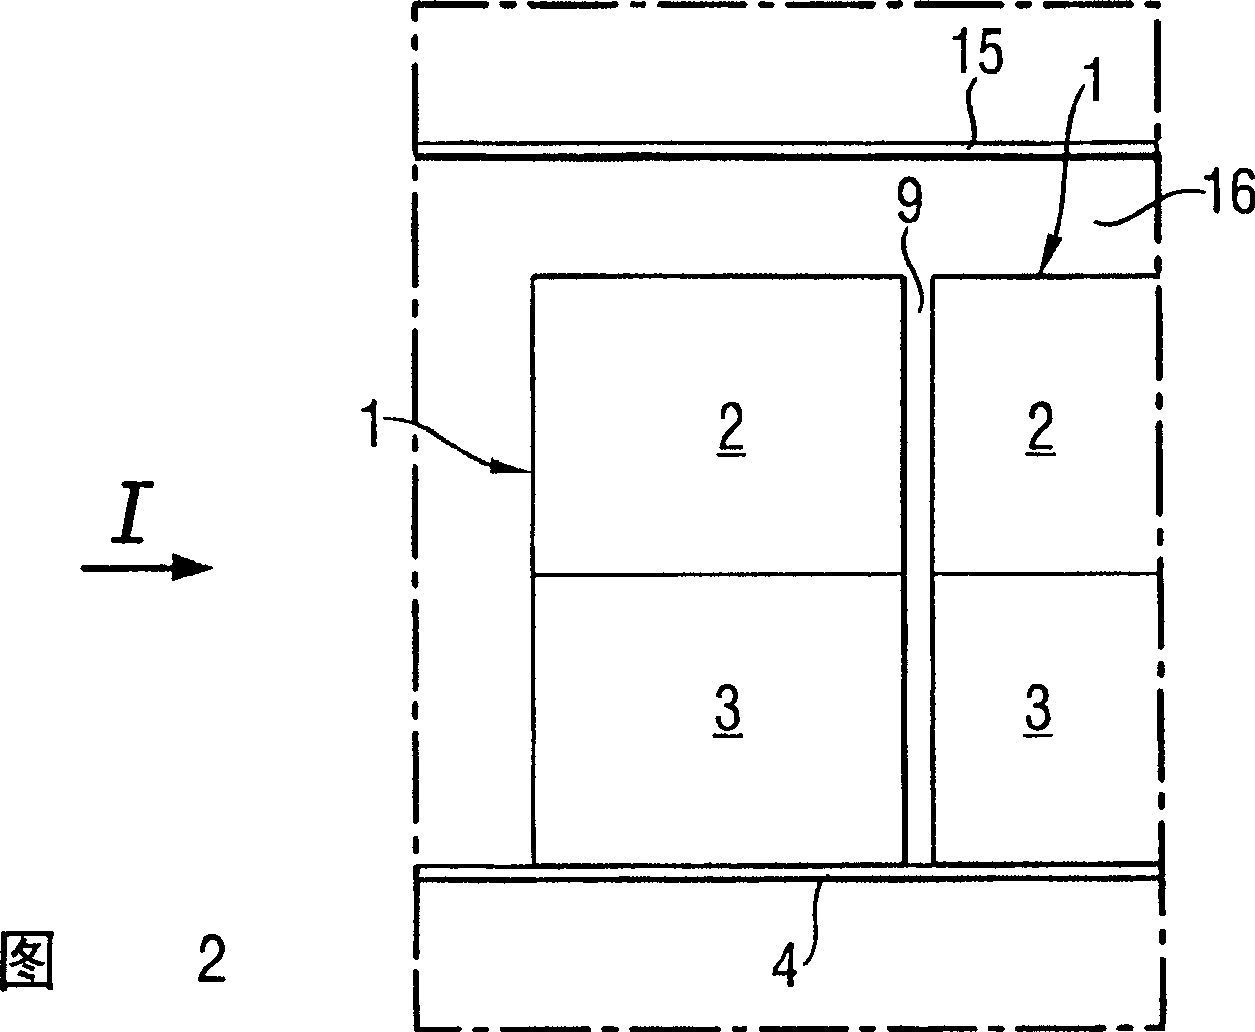 Method and system of installing and connecting prefabricated room units to a ship or other watercraft